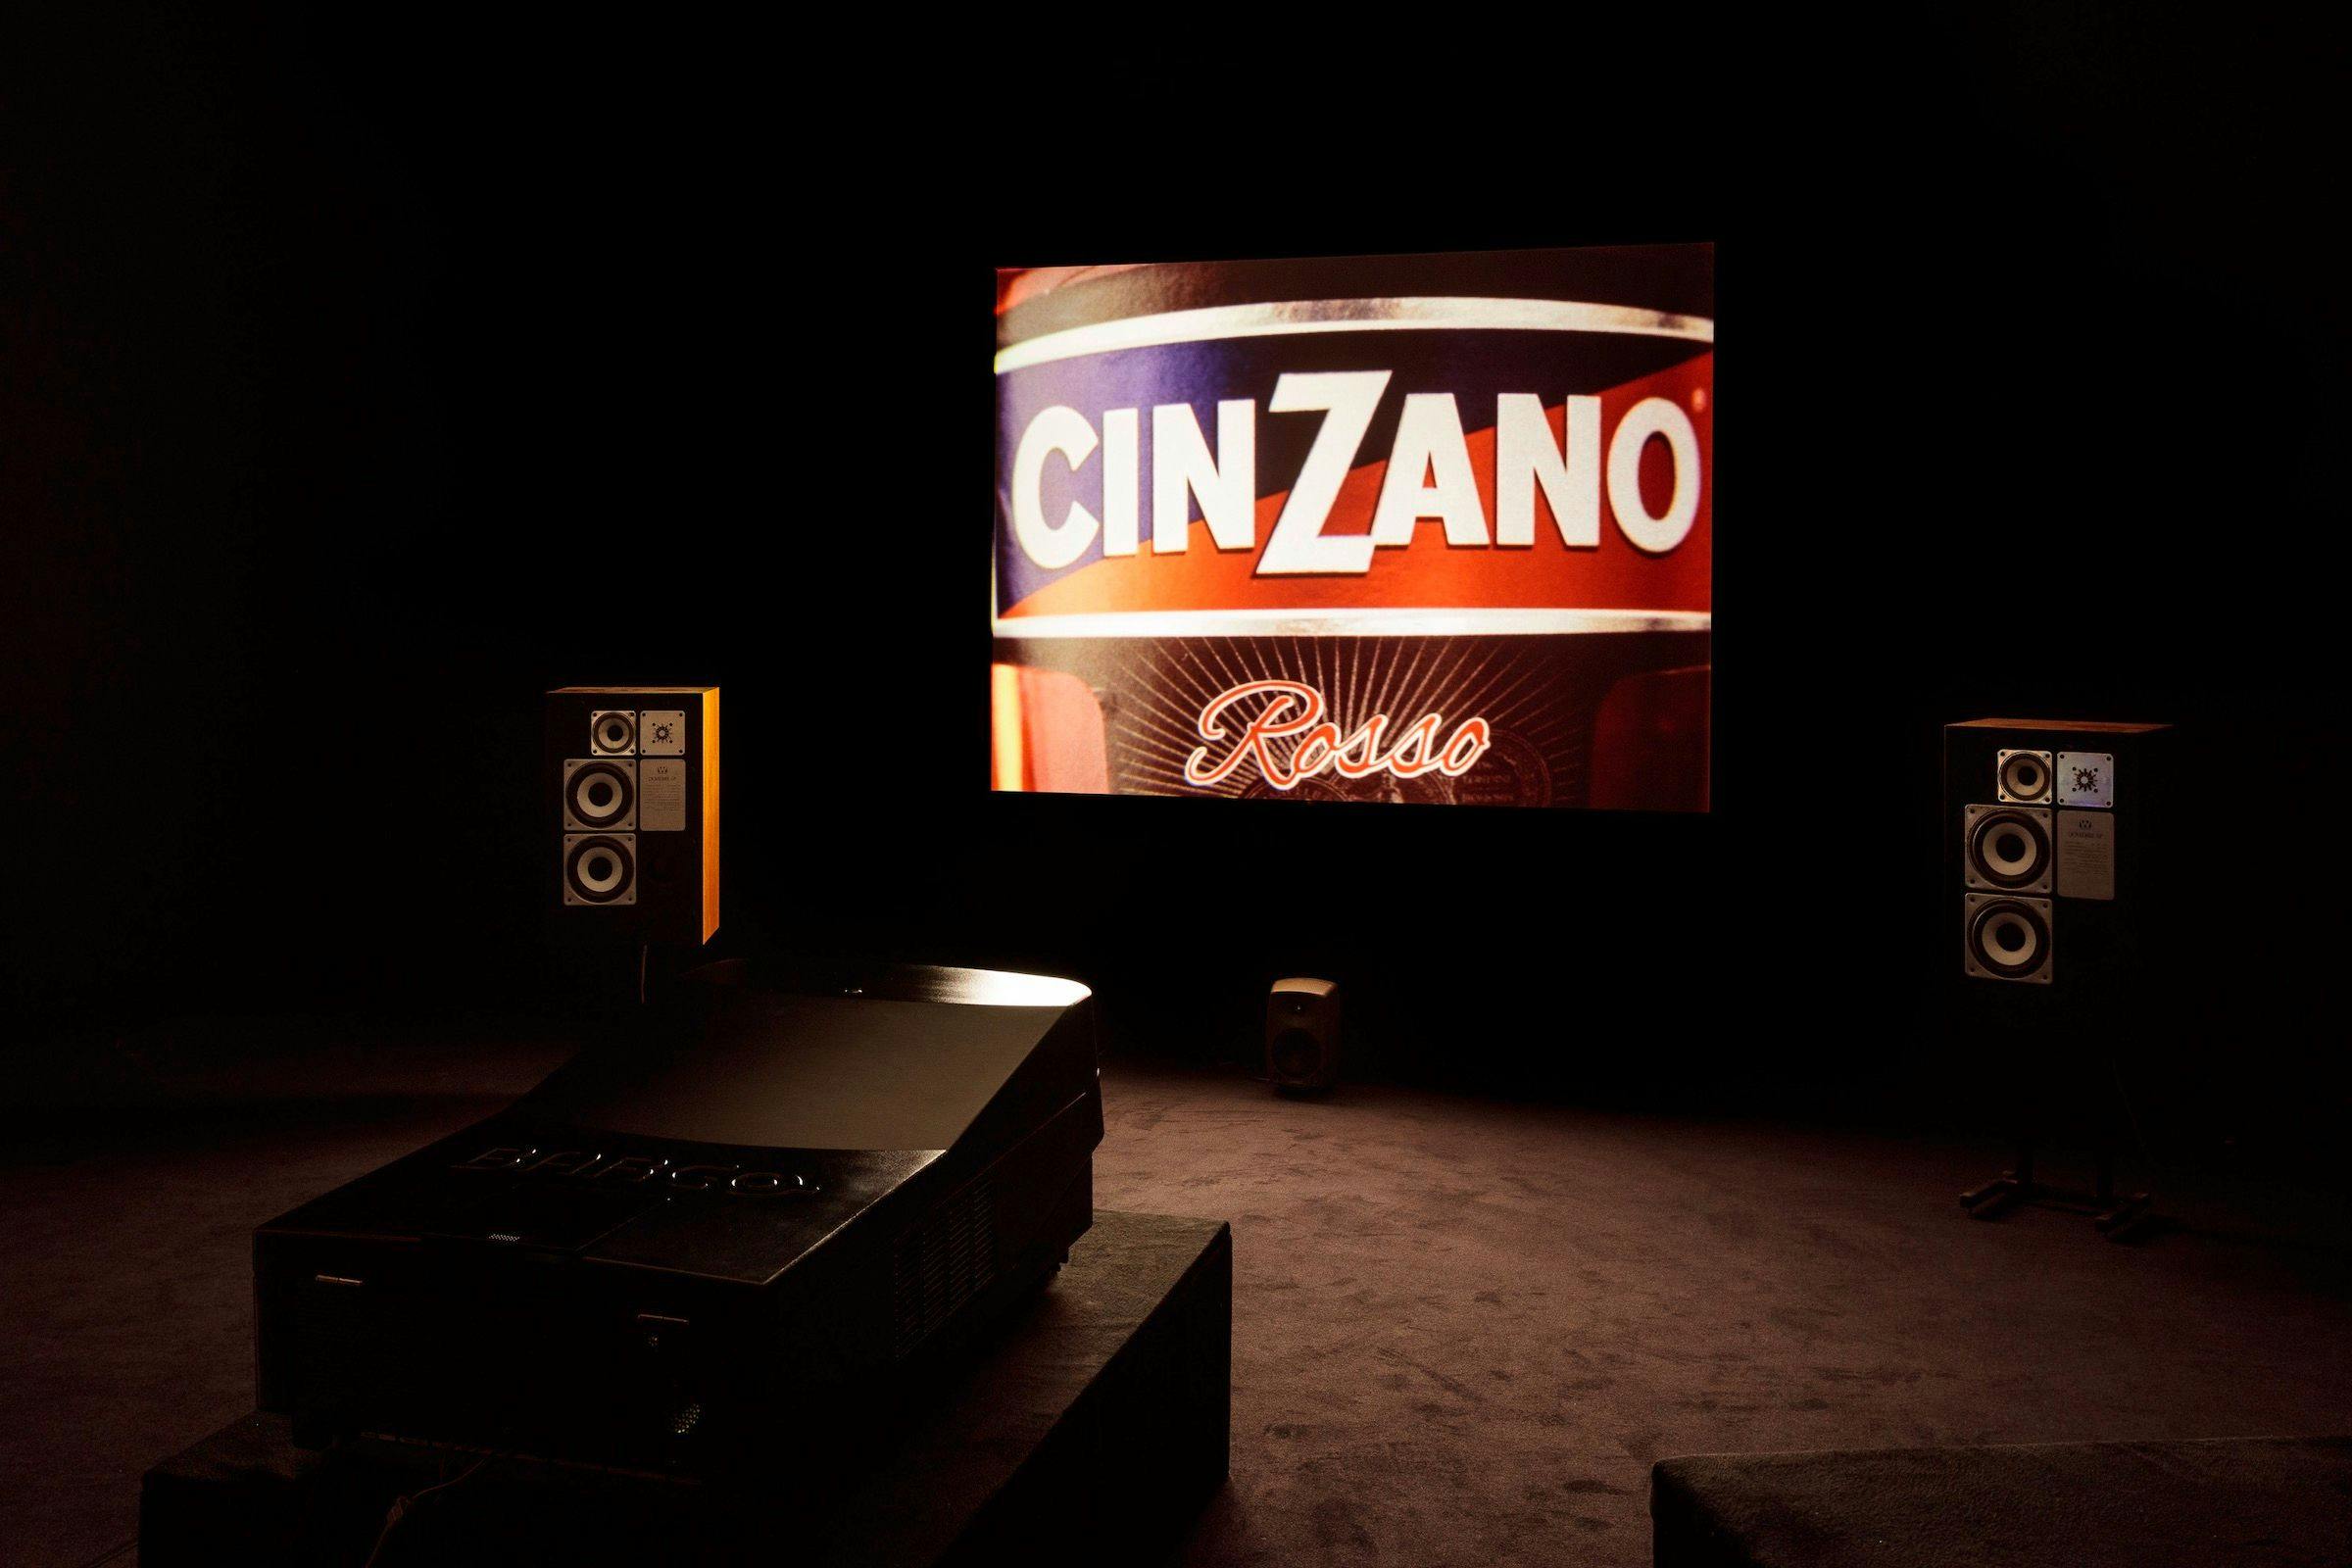 an installation view of Dream English Kid, 1964-1999 AD. The image of the work projected is a label from a Cinzano bottle. There are speakers either side of the projection and the projector is visible